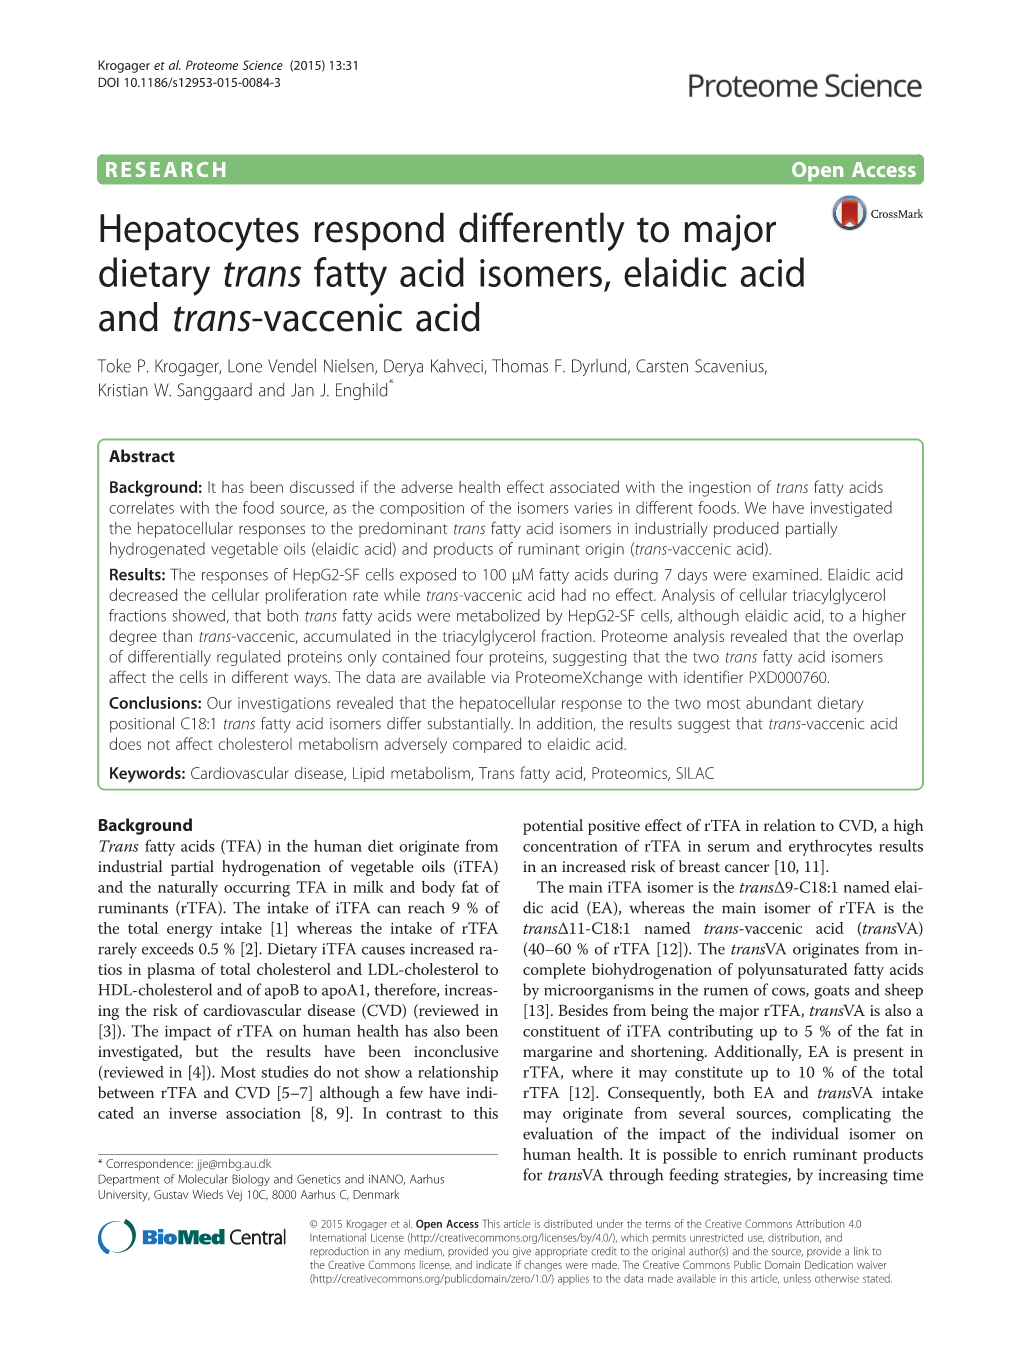 Hepatocytes Respond Differently to Major Dietary Trans Fatty Acid Isomers, Elaidic Acid and Trans-Vaccenic Acid Toke P